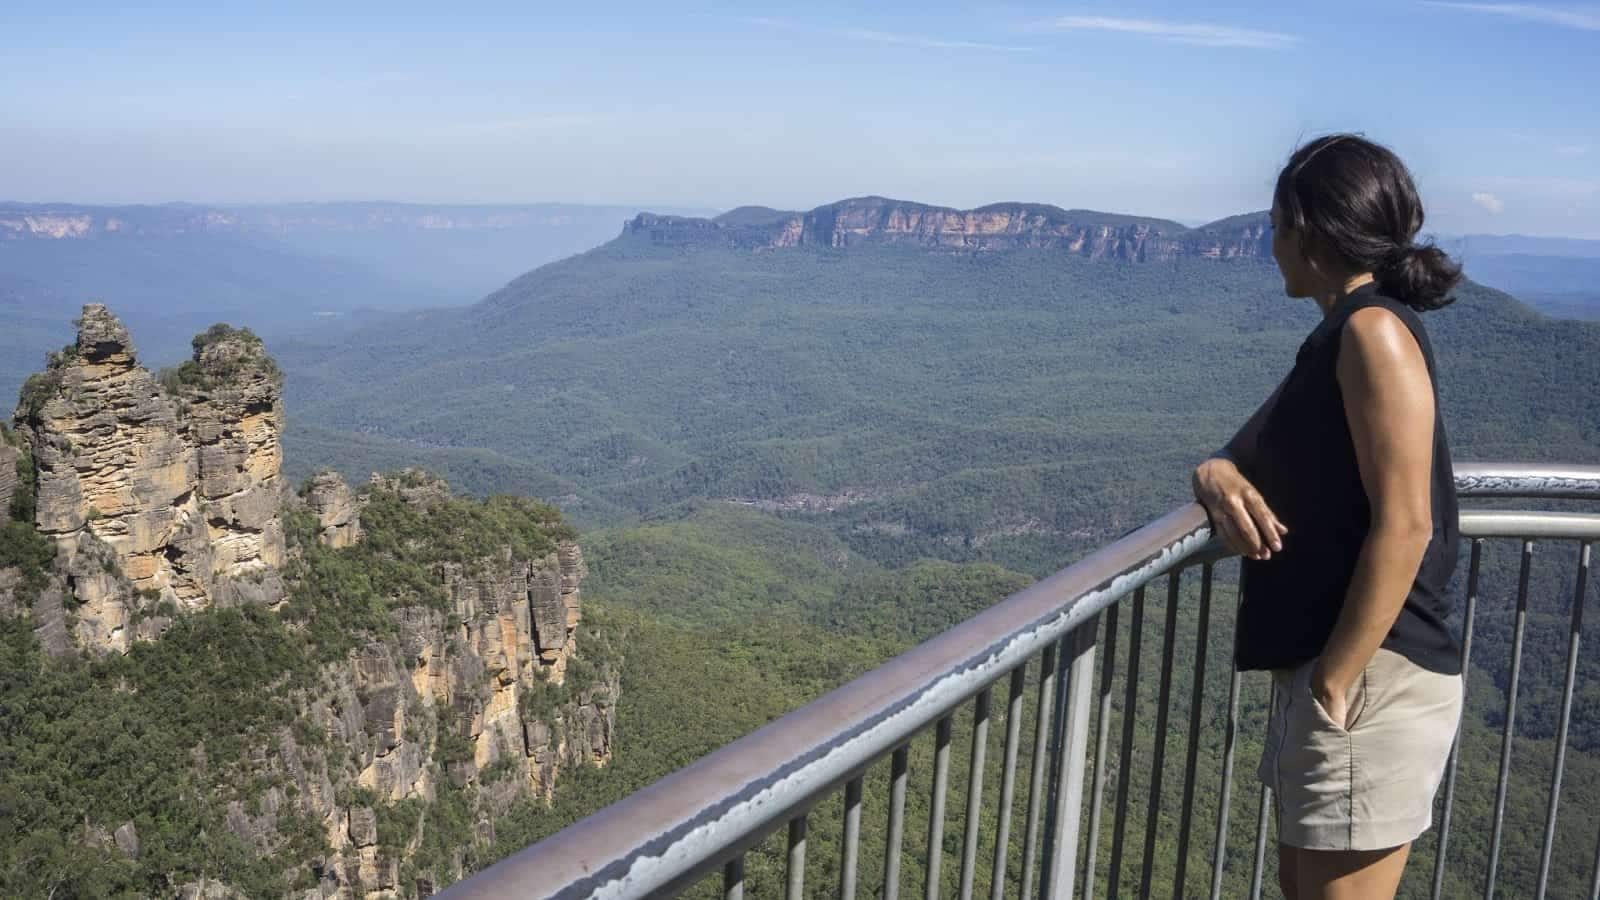 Places atop Sydney's spectacular Blue Mountains that are worth visiting